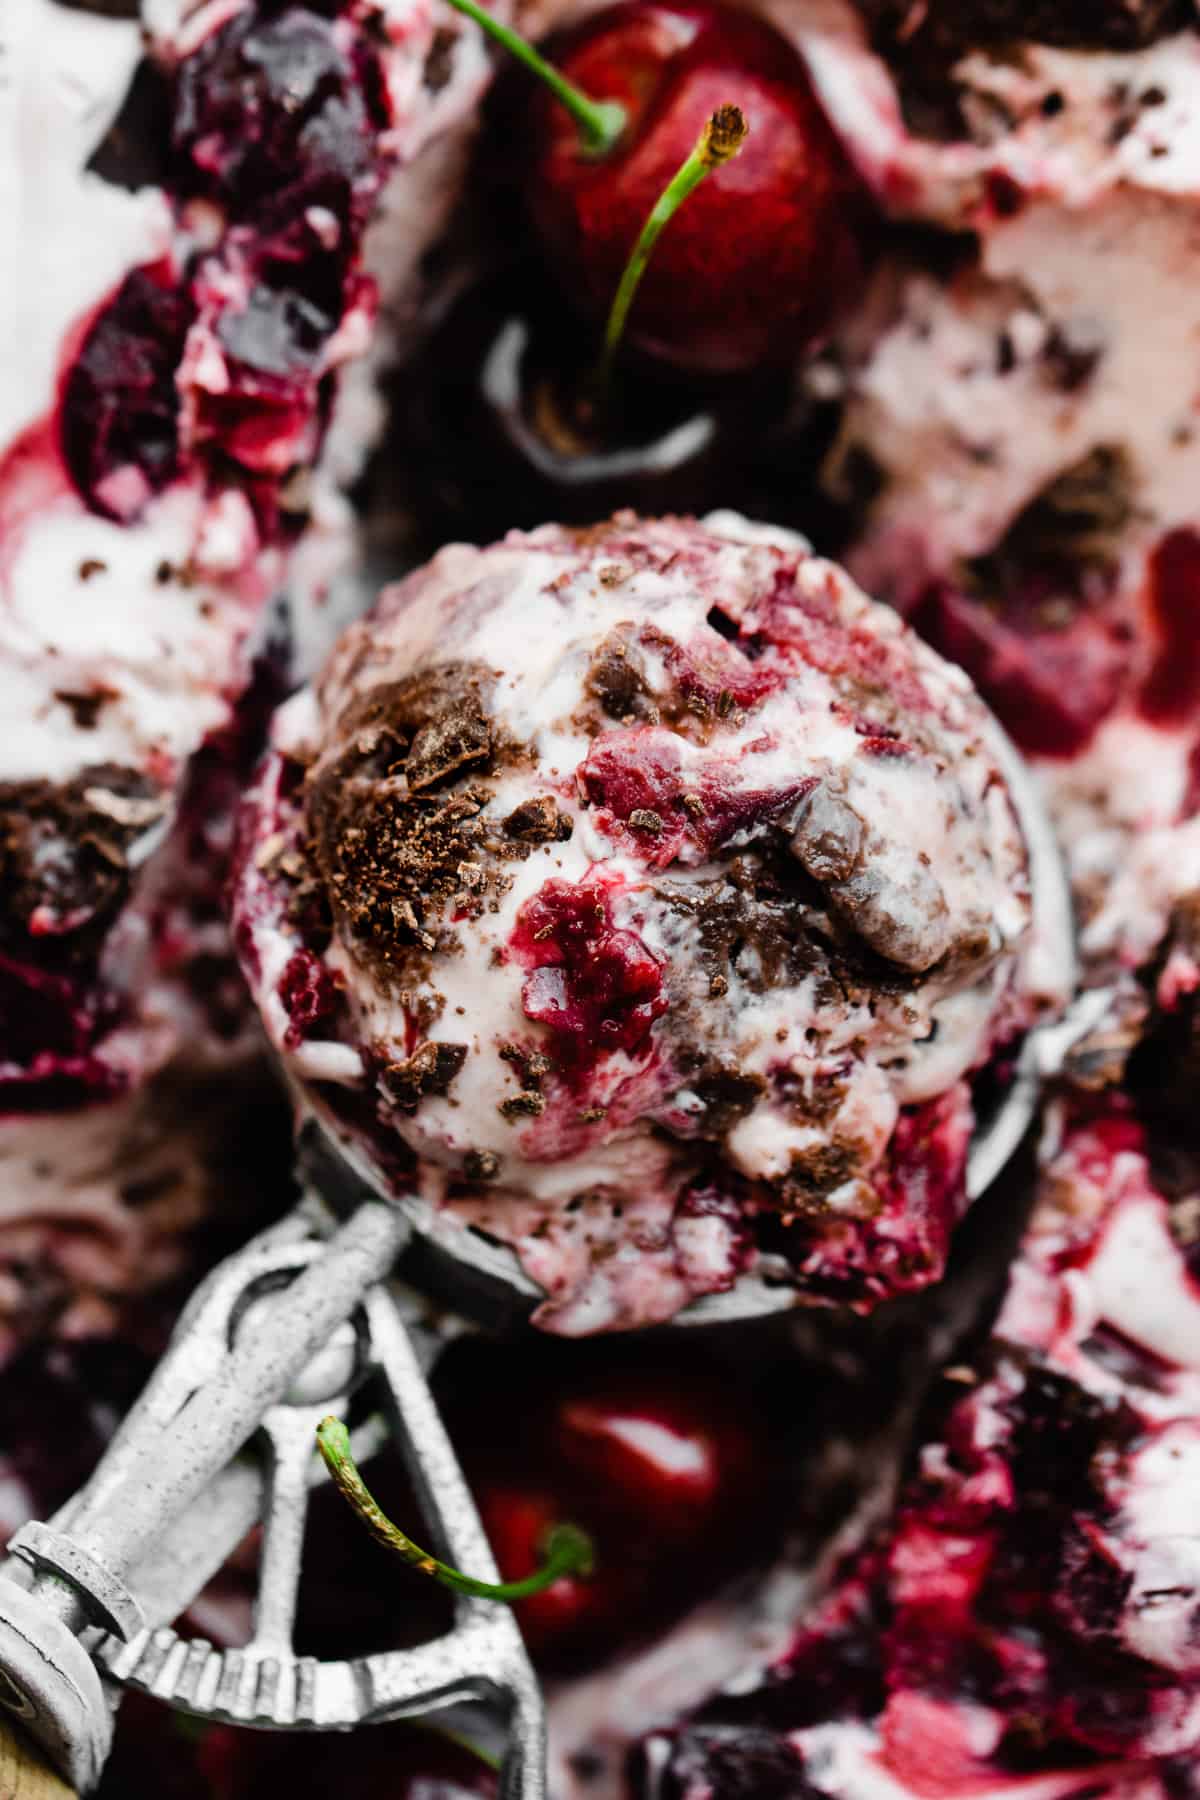 A close-up of a scoop of black forest ice cream in an antique scoop.